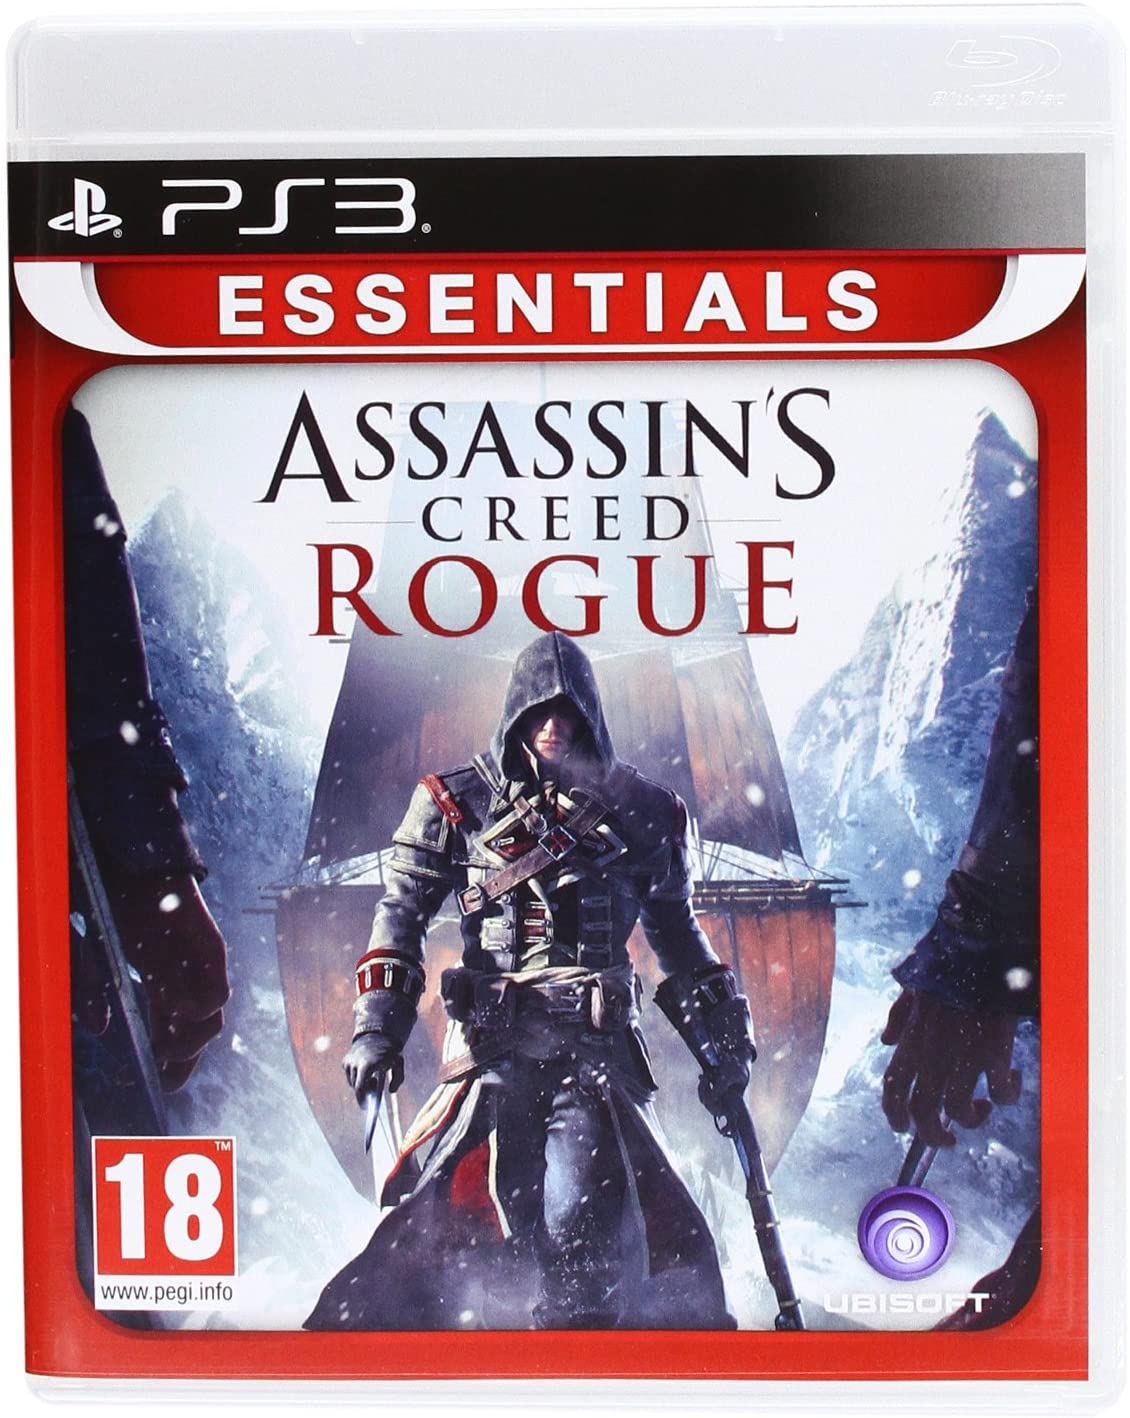 Assassins Creed Rogue - Review: Assassin's Creed Rogue - The Enemy